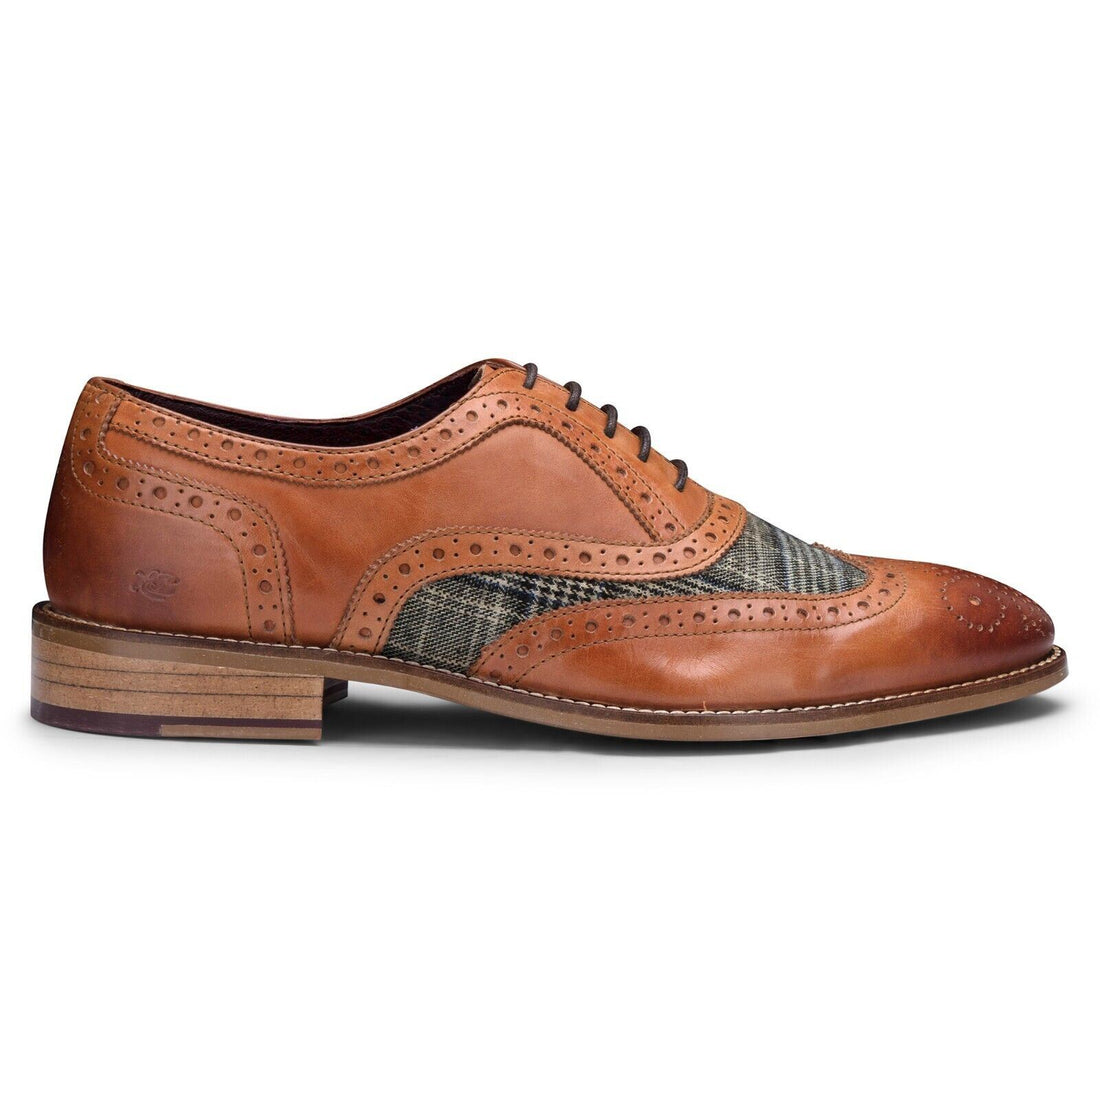 Mens Classic Oxford Tan Leather Gatsby Brogue Shoes with Tweed - Upperclass Fashions 